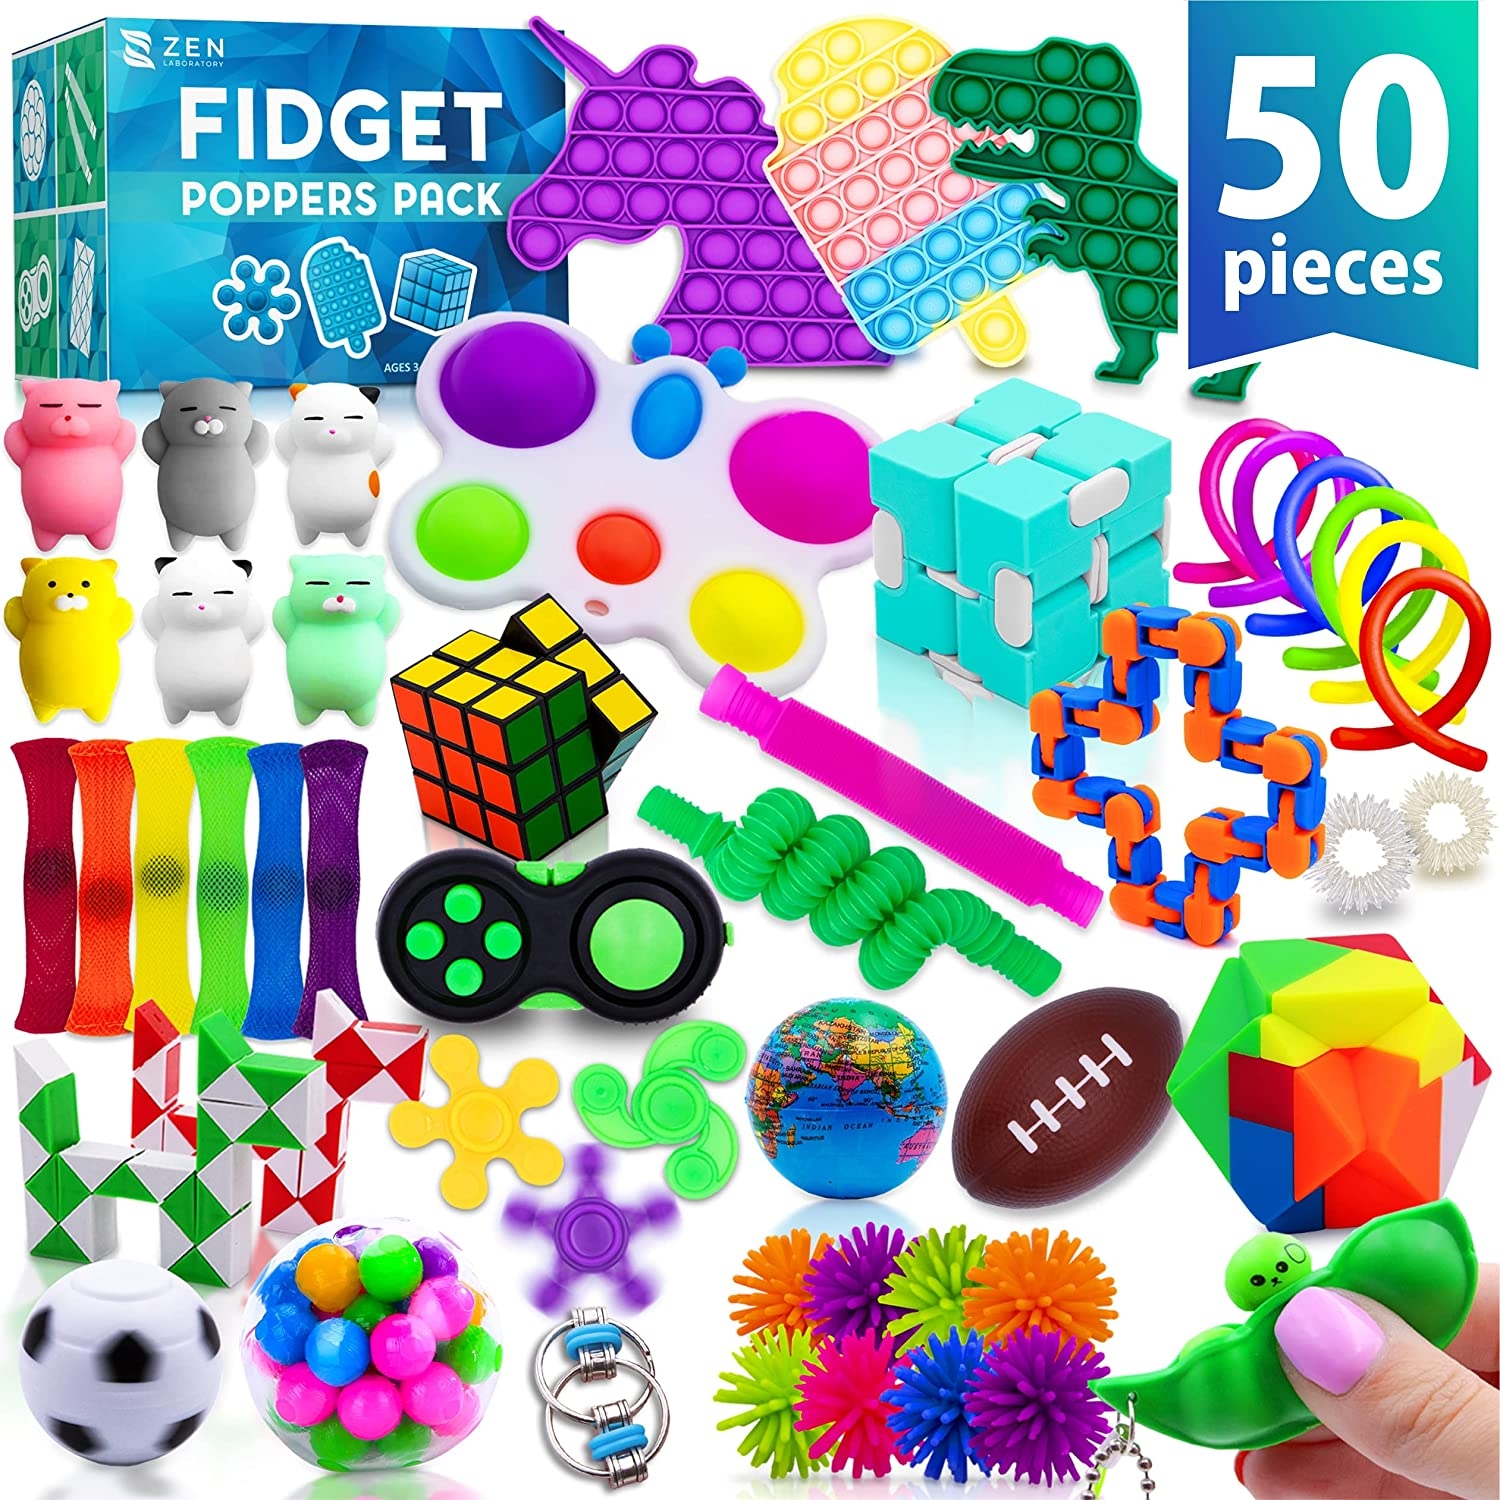 50 Pcs) Fidget Poppers Popit Toy Pack Push Pop Bubble Popping Set It Mini  Poppet Figit Package Figetget Spinners, Infinity Cube – Strong Heroes